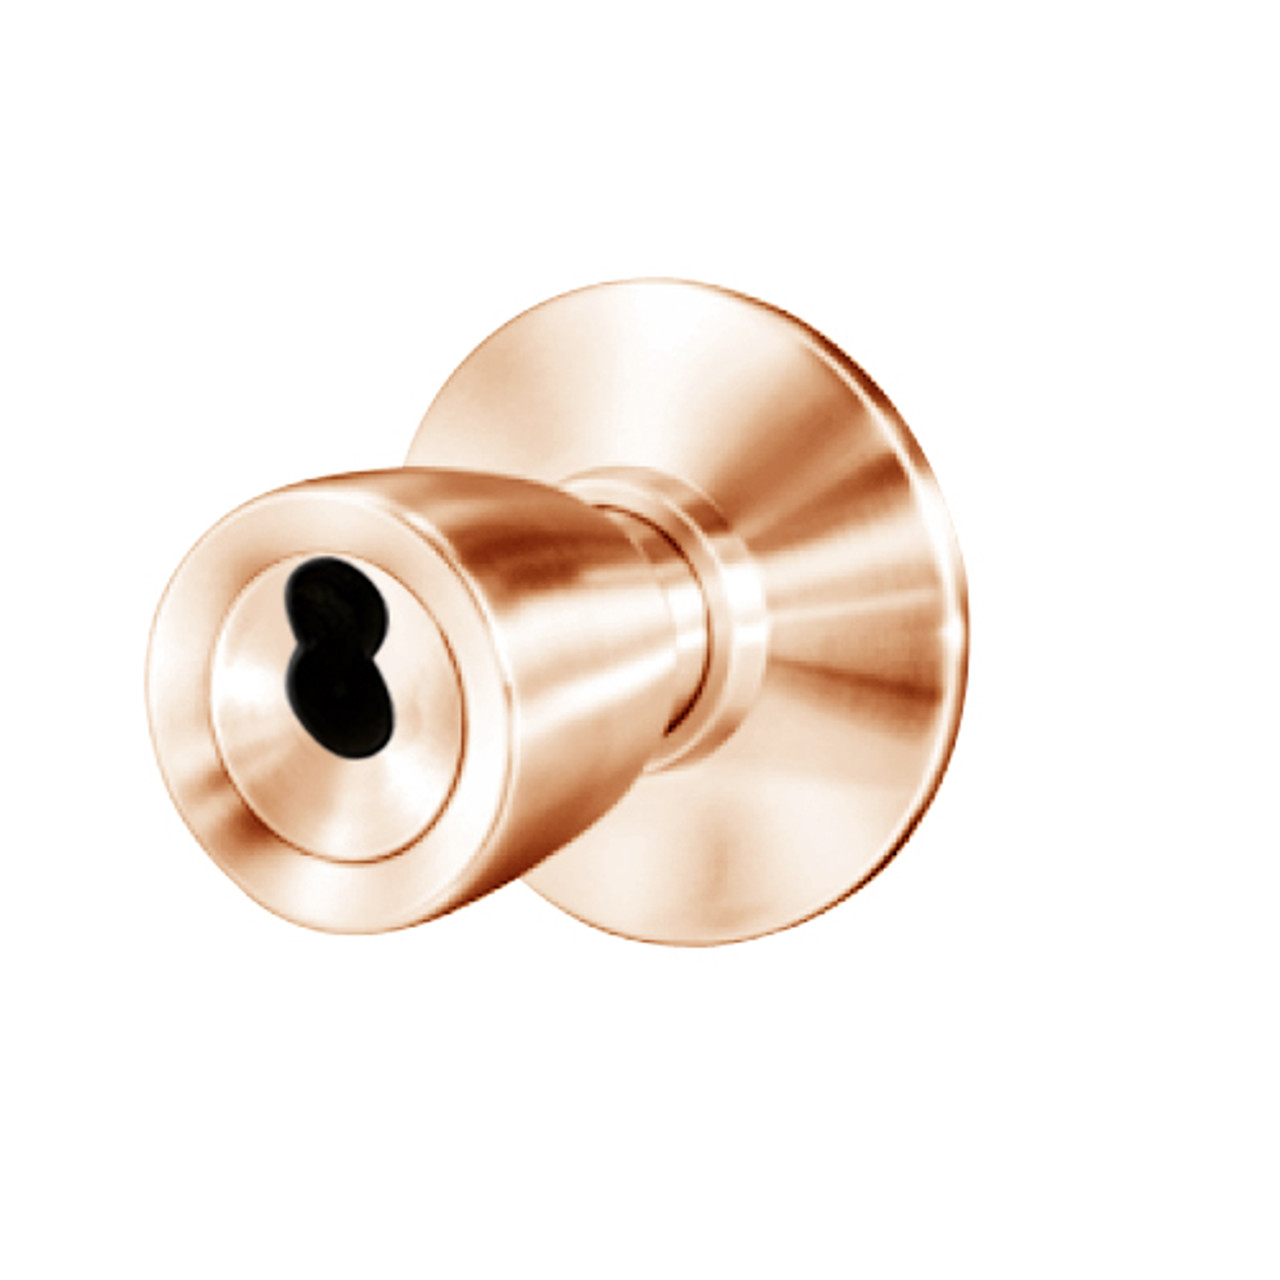 8K37C6DS3611 Best 8K Series Apartment Heavy Duty Cylindrical Knob Locks with Tulip Style in Bright Bronze